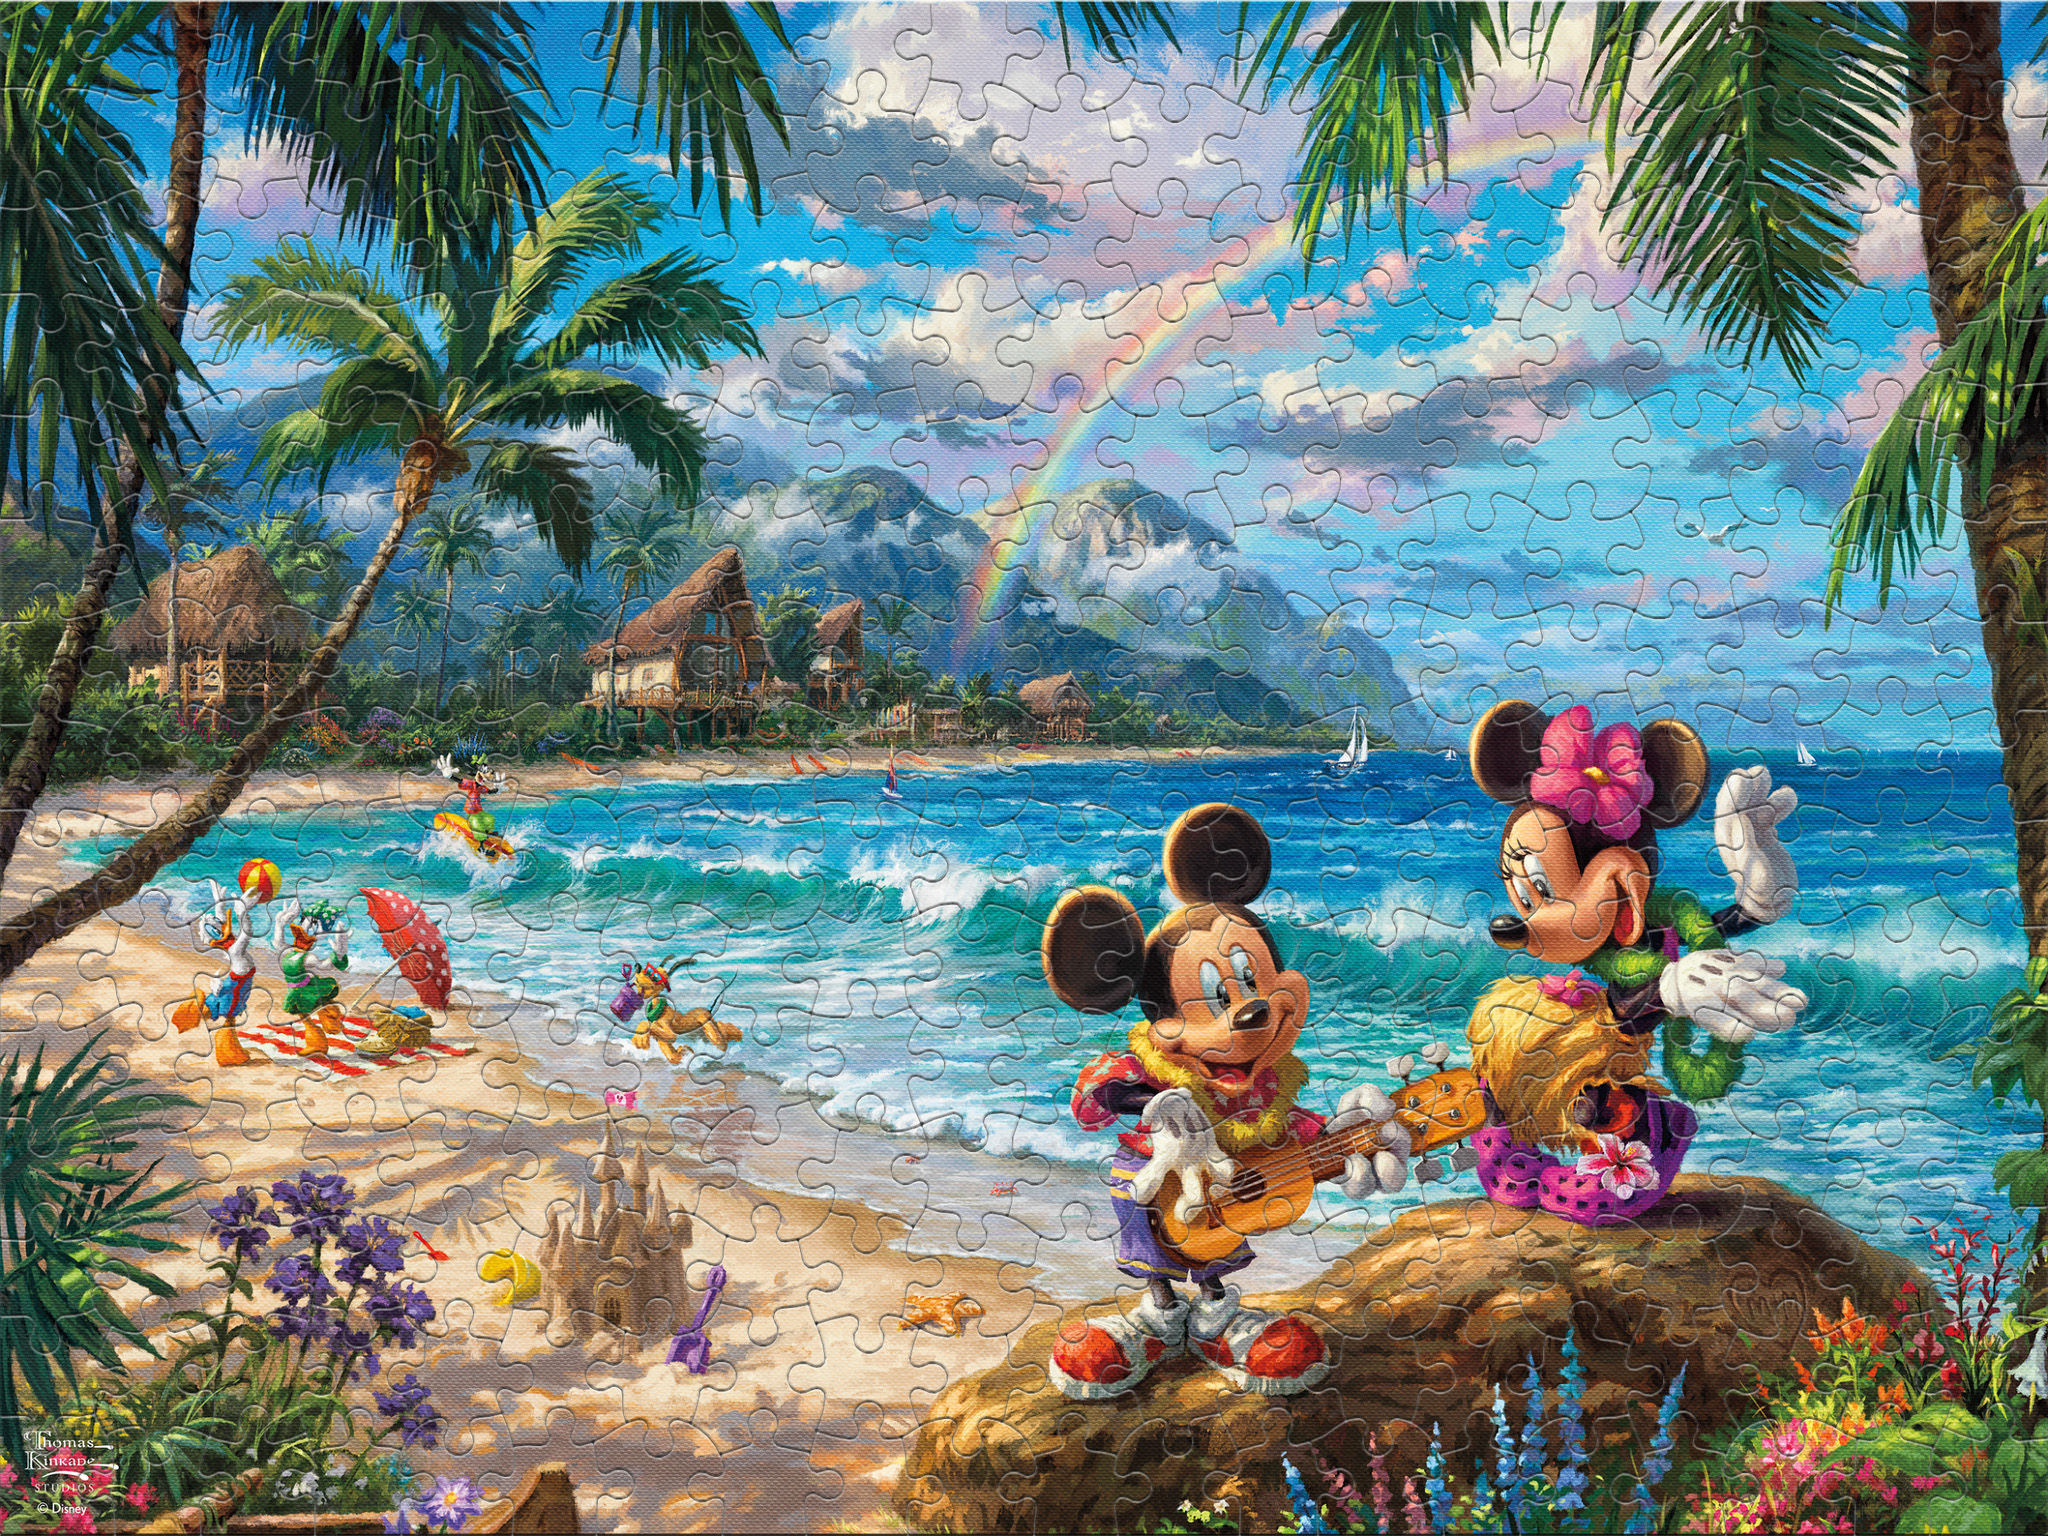 Mickey and Minnie in Hawaii Oversized Puzzle Disney Jigsaw Puzzle